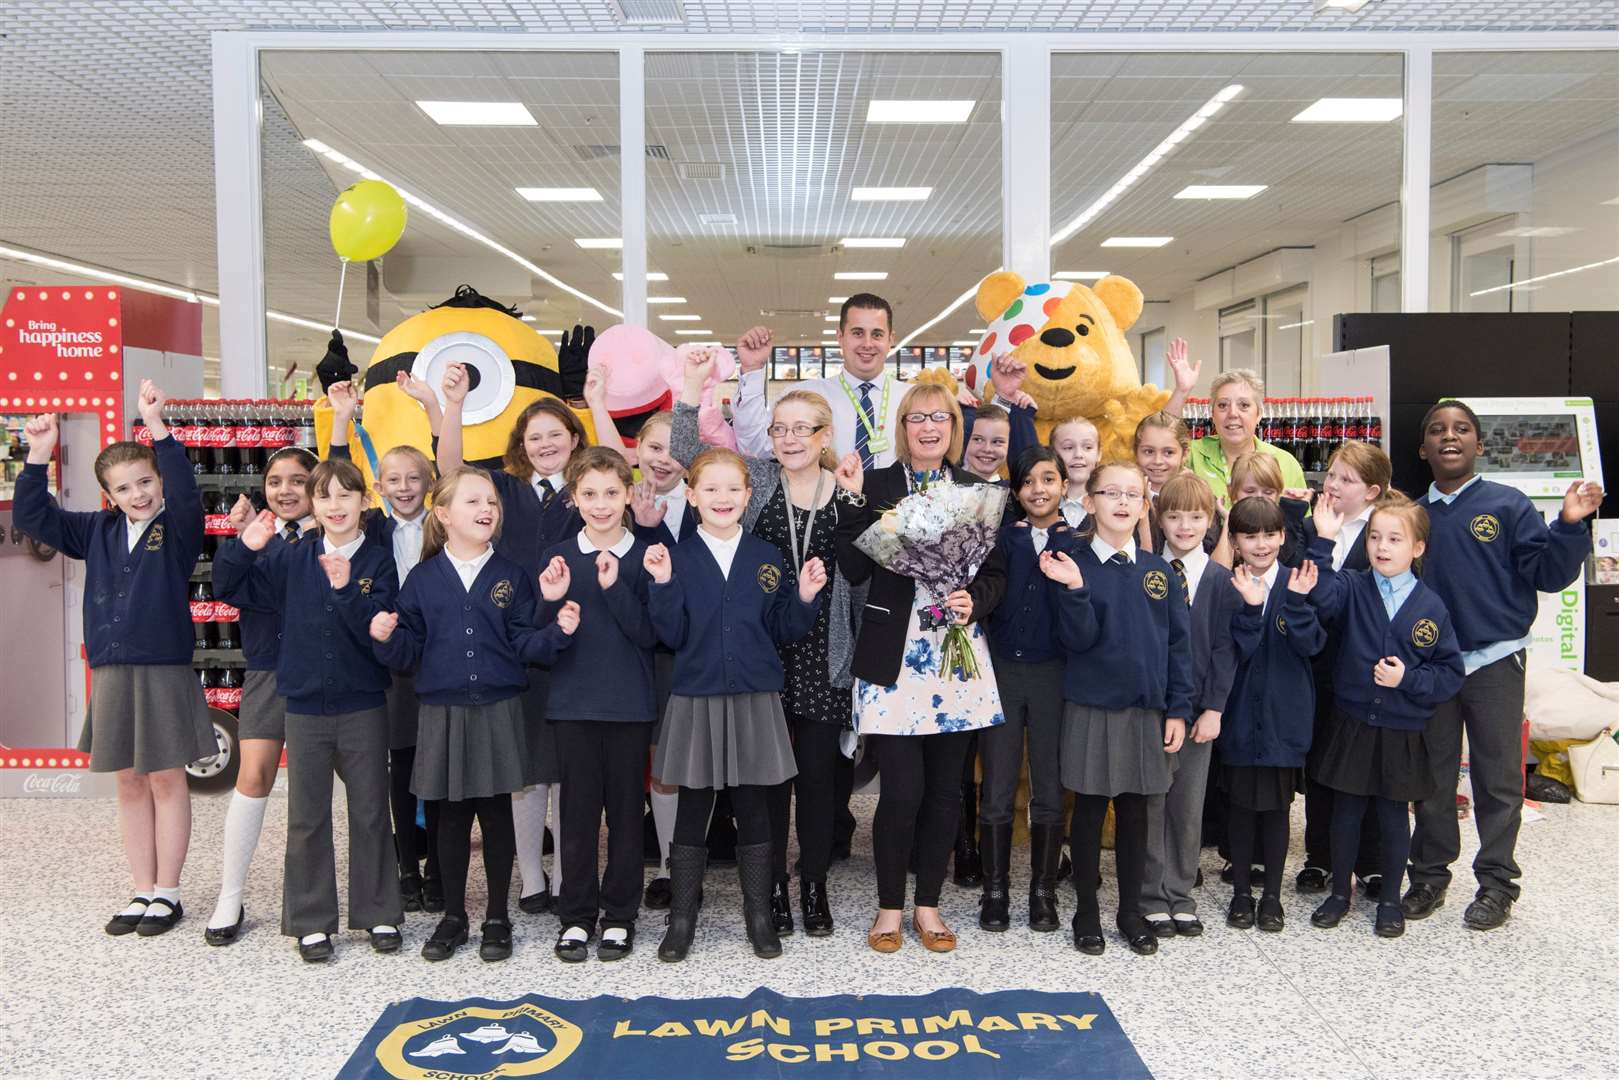 Lawn Primary School recieved a £500 donation from Asda Gravesend to helpt them enter a national singing competition